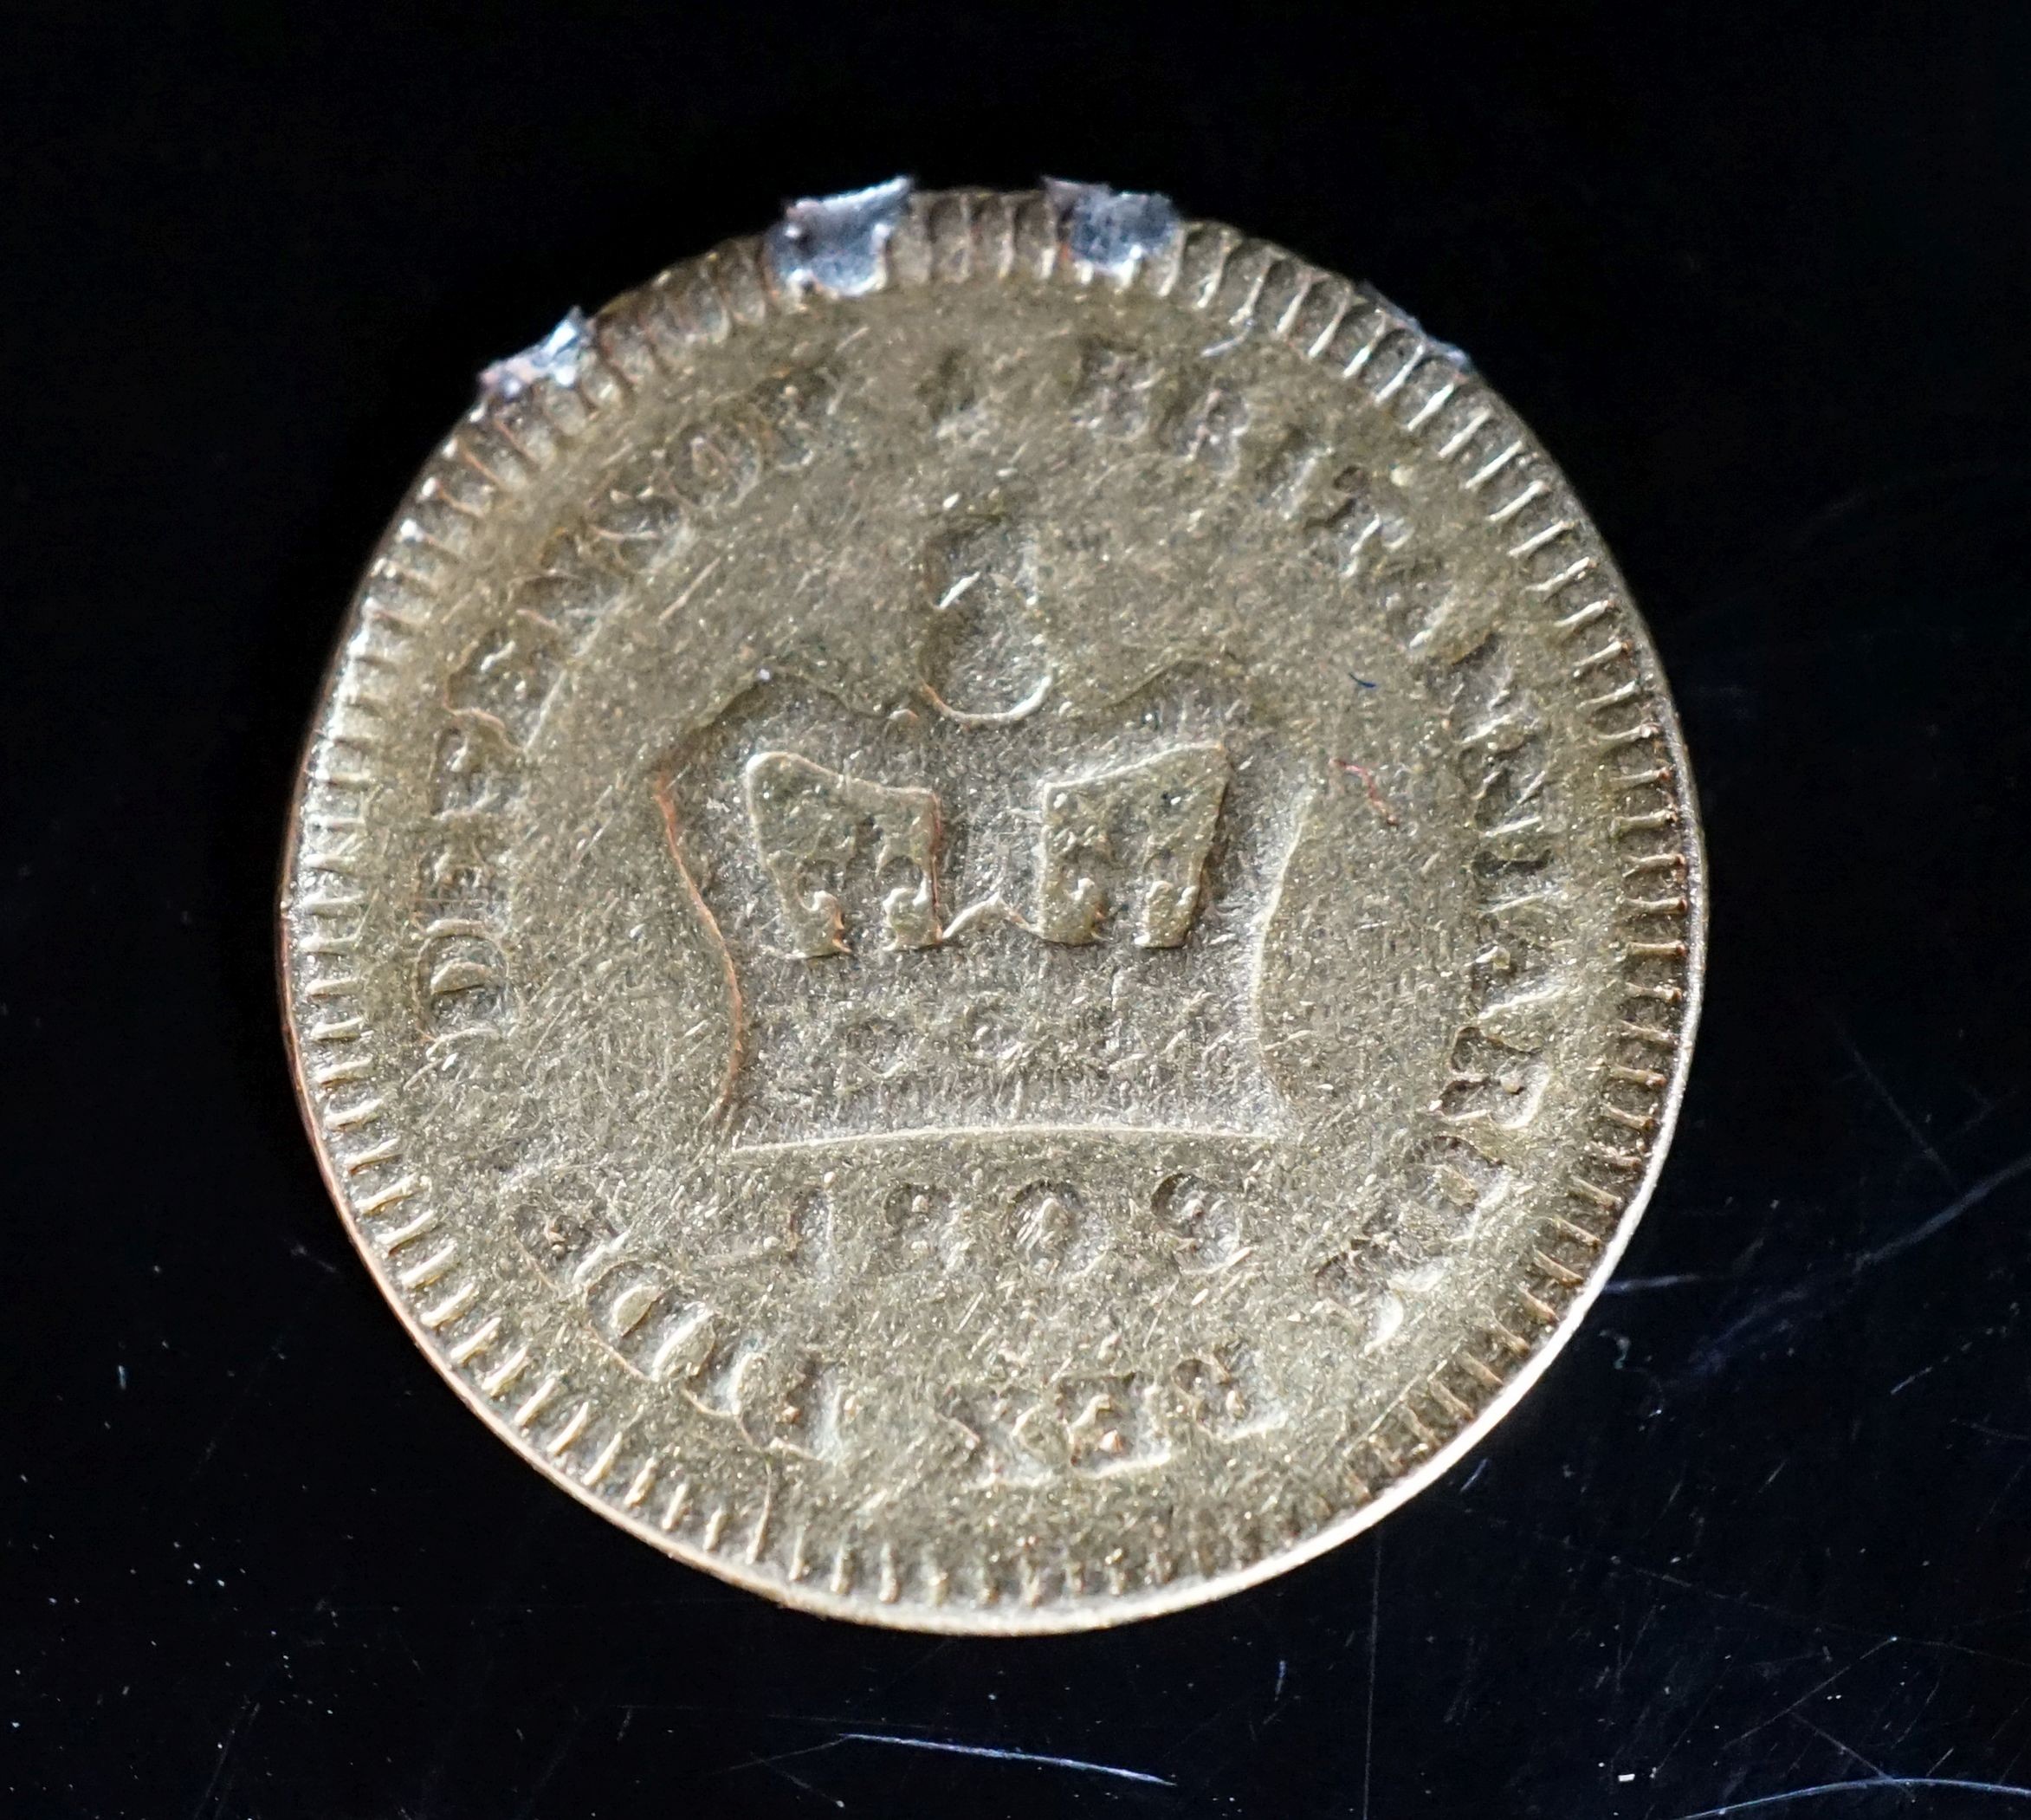 A George III 1809 gold one third guinea coin.